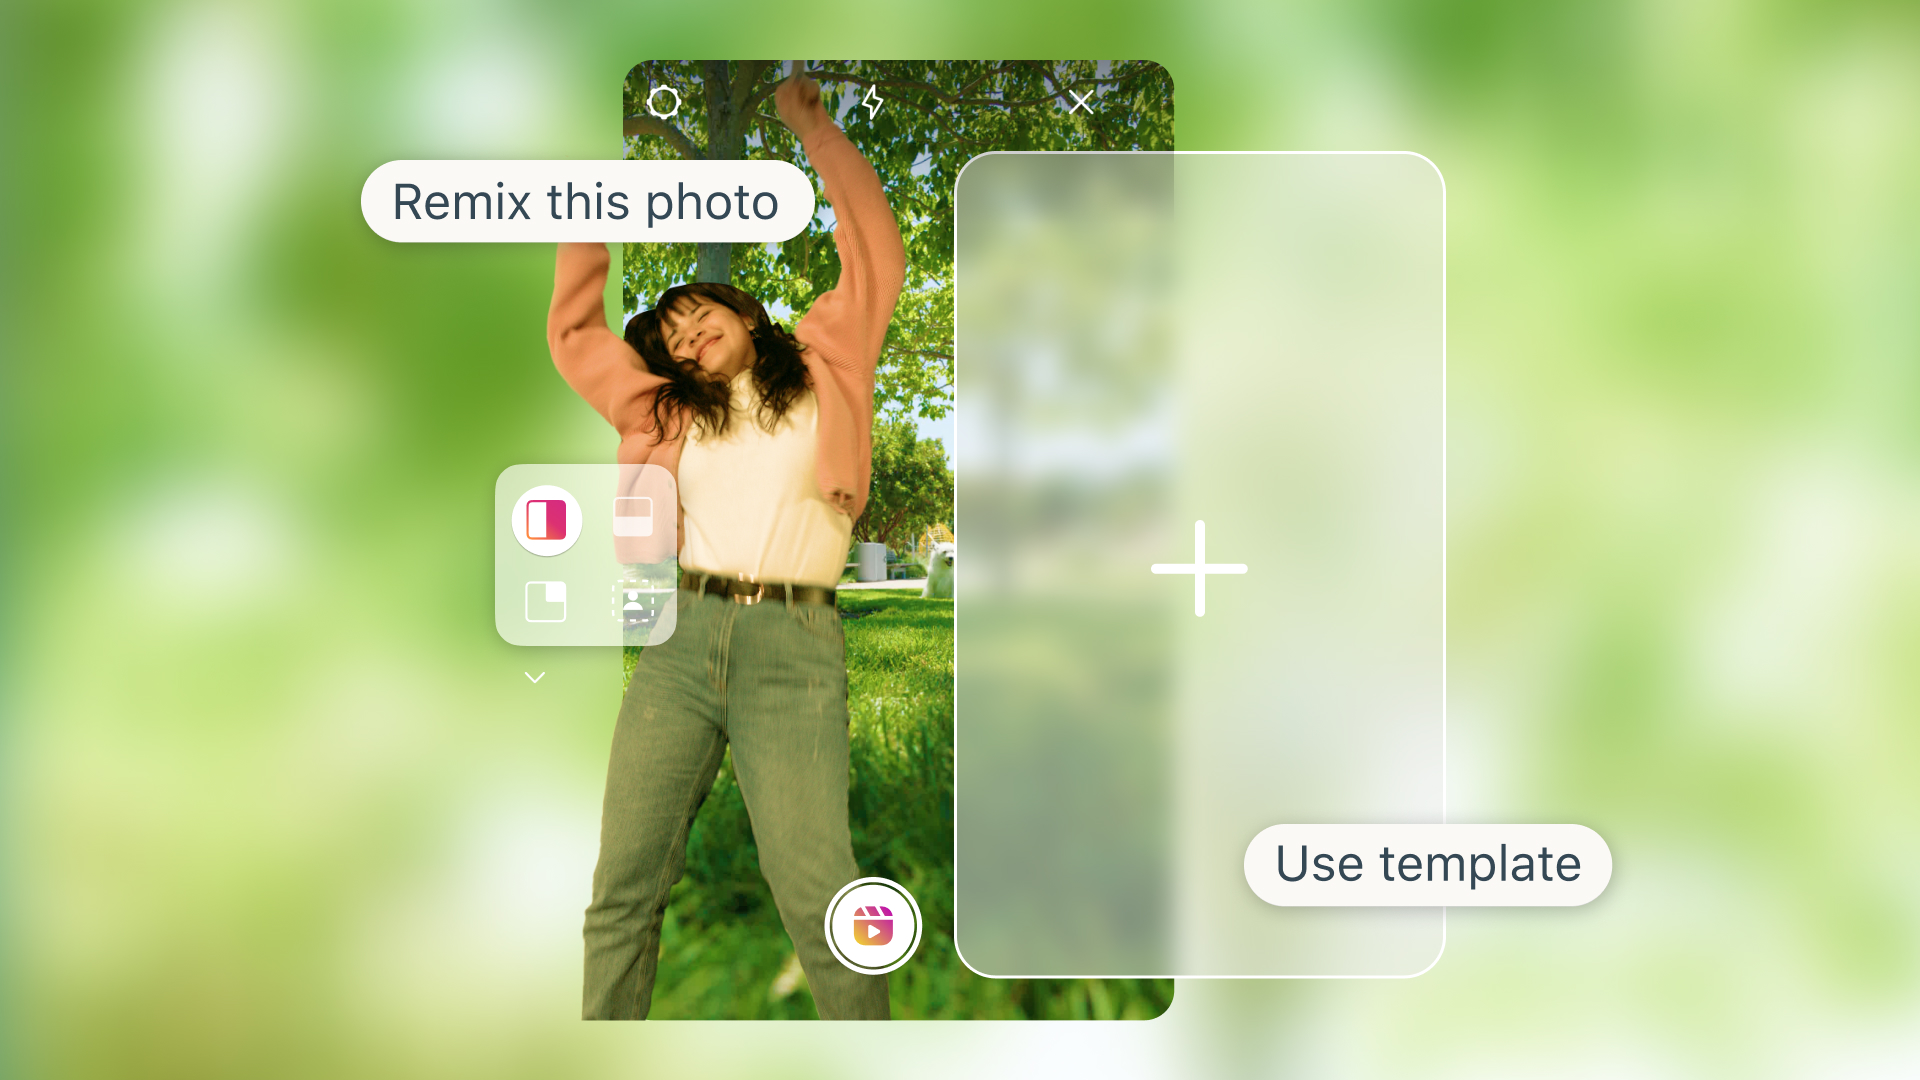 Image showing the use of a template when remixing a photo on Instagram.